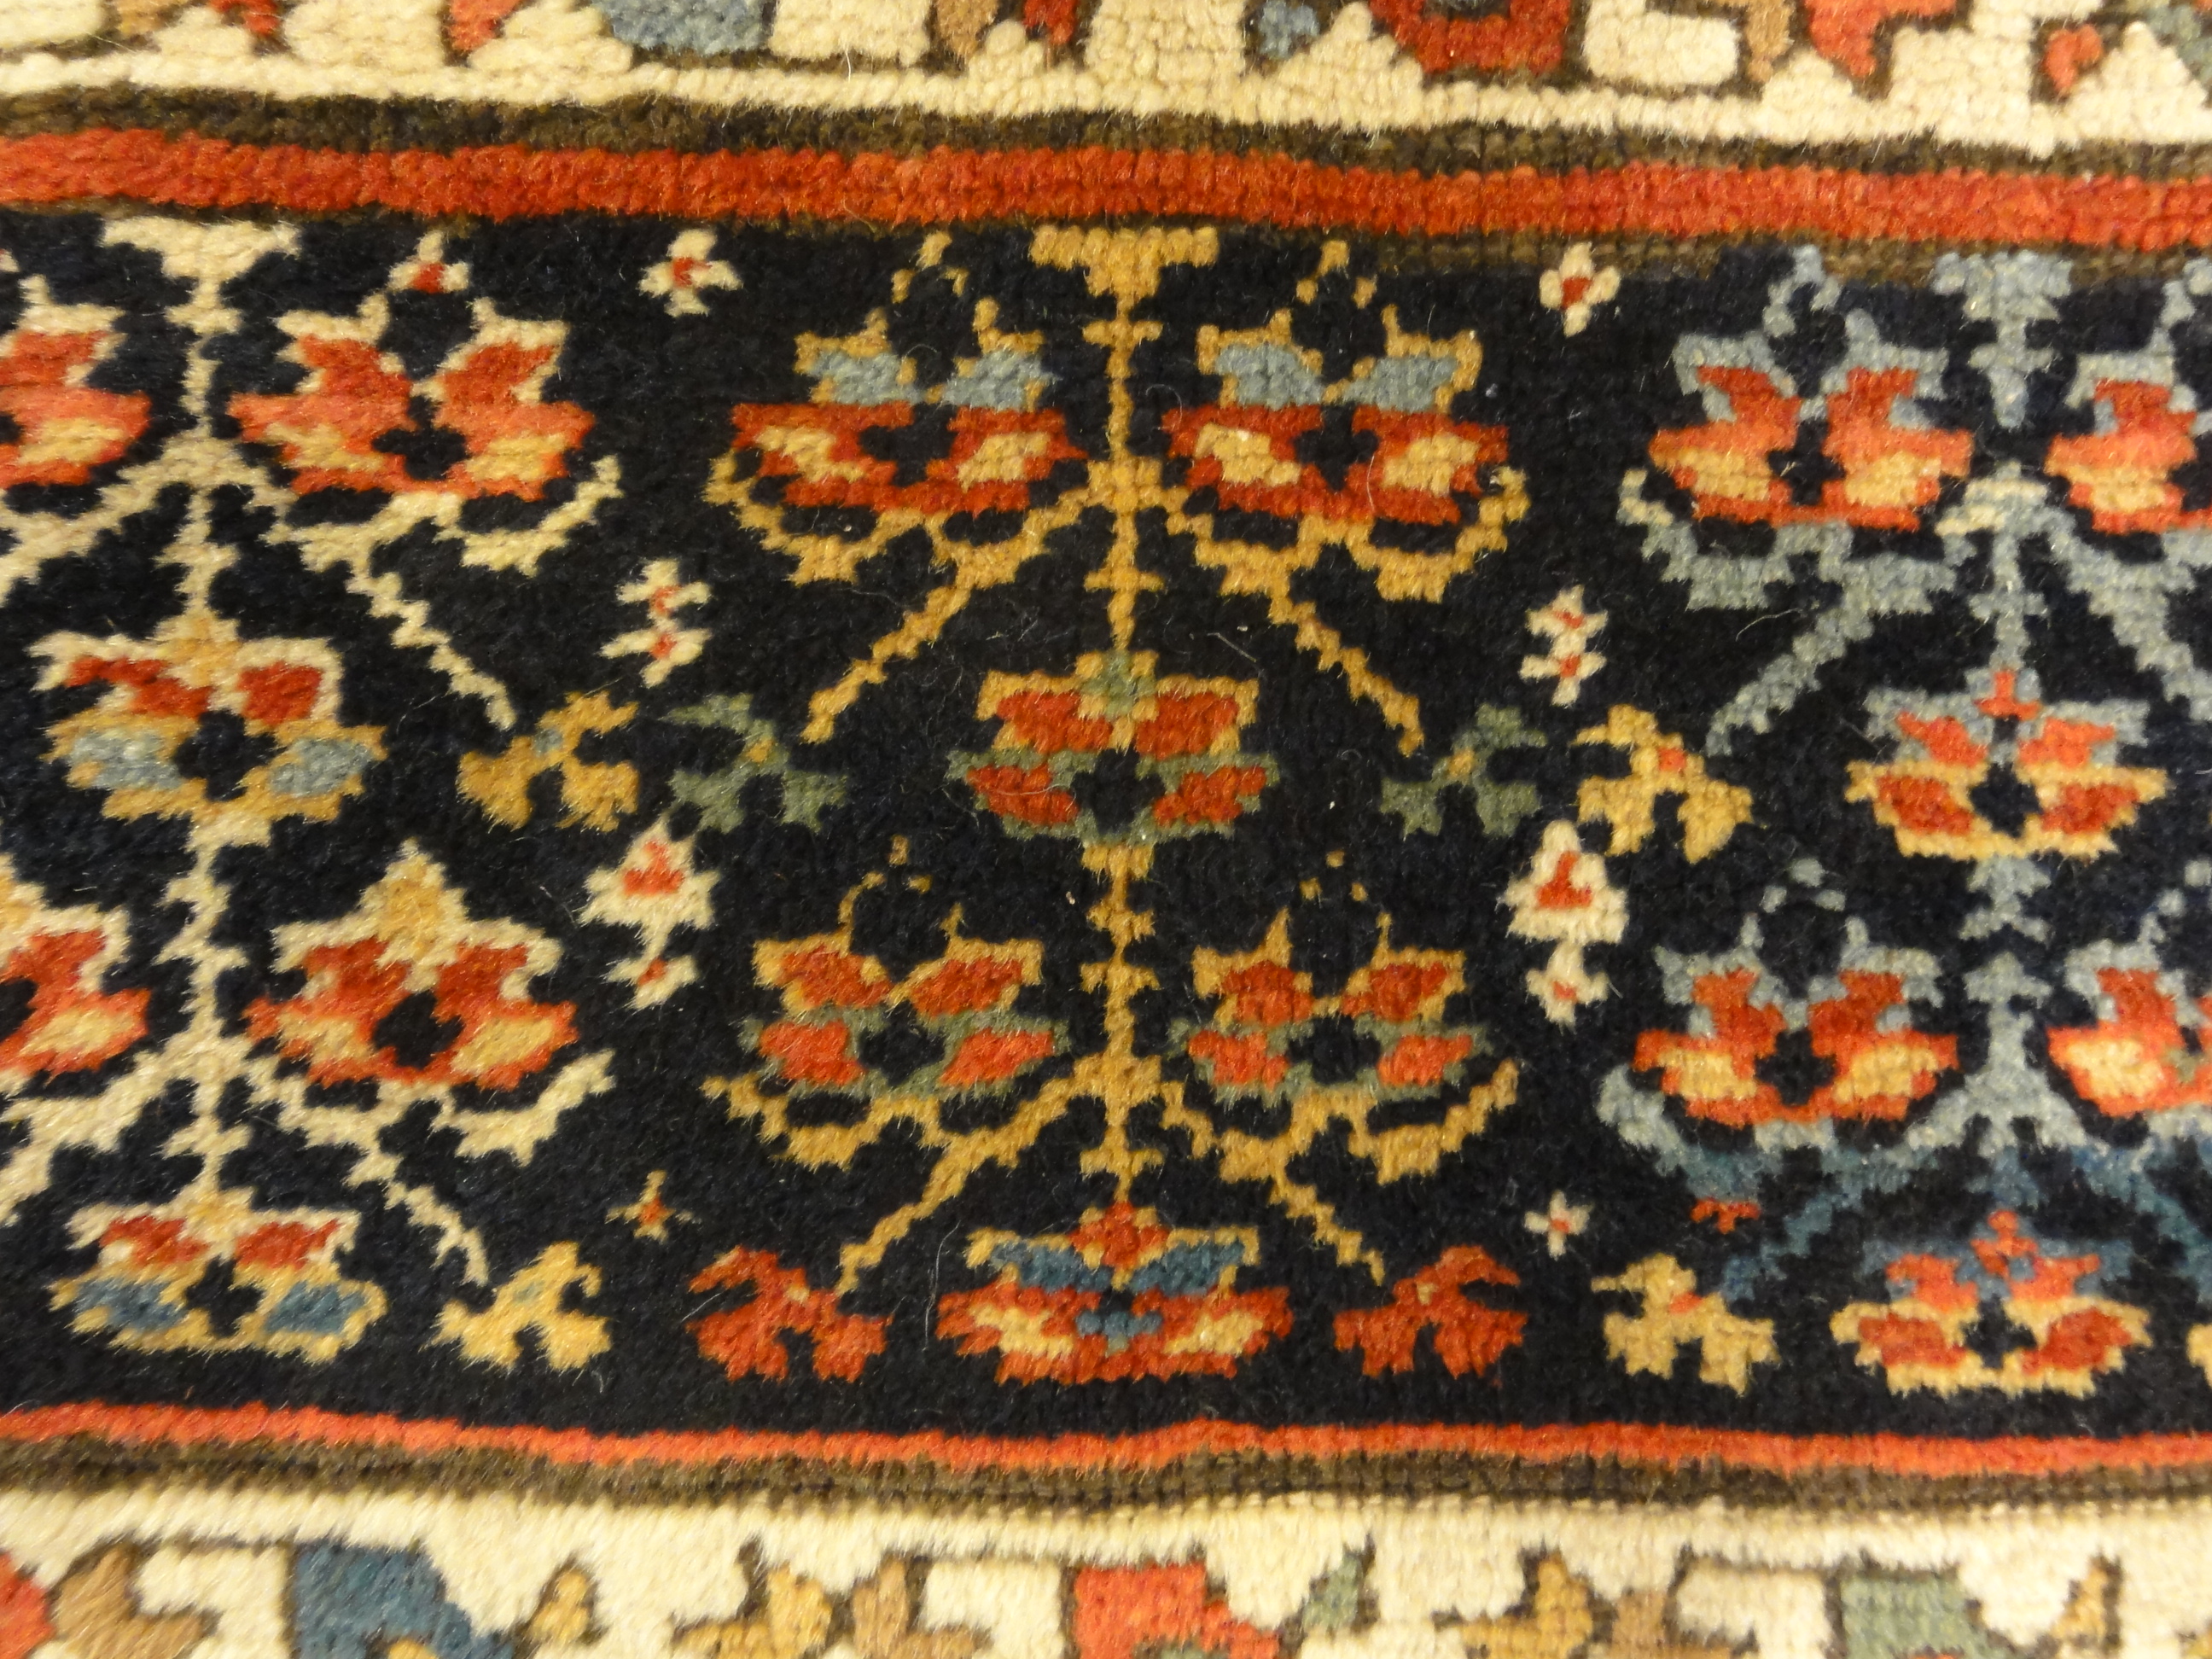 Proto Shahsavan Soj-Bolagh rug ca. 1800 in perfect condition. Classical Tribal art from Kourosh Collection. World class tribal rug at its best.